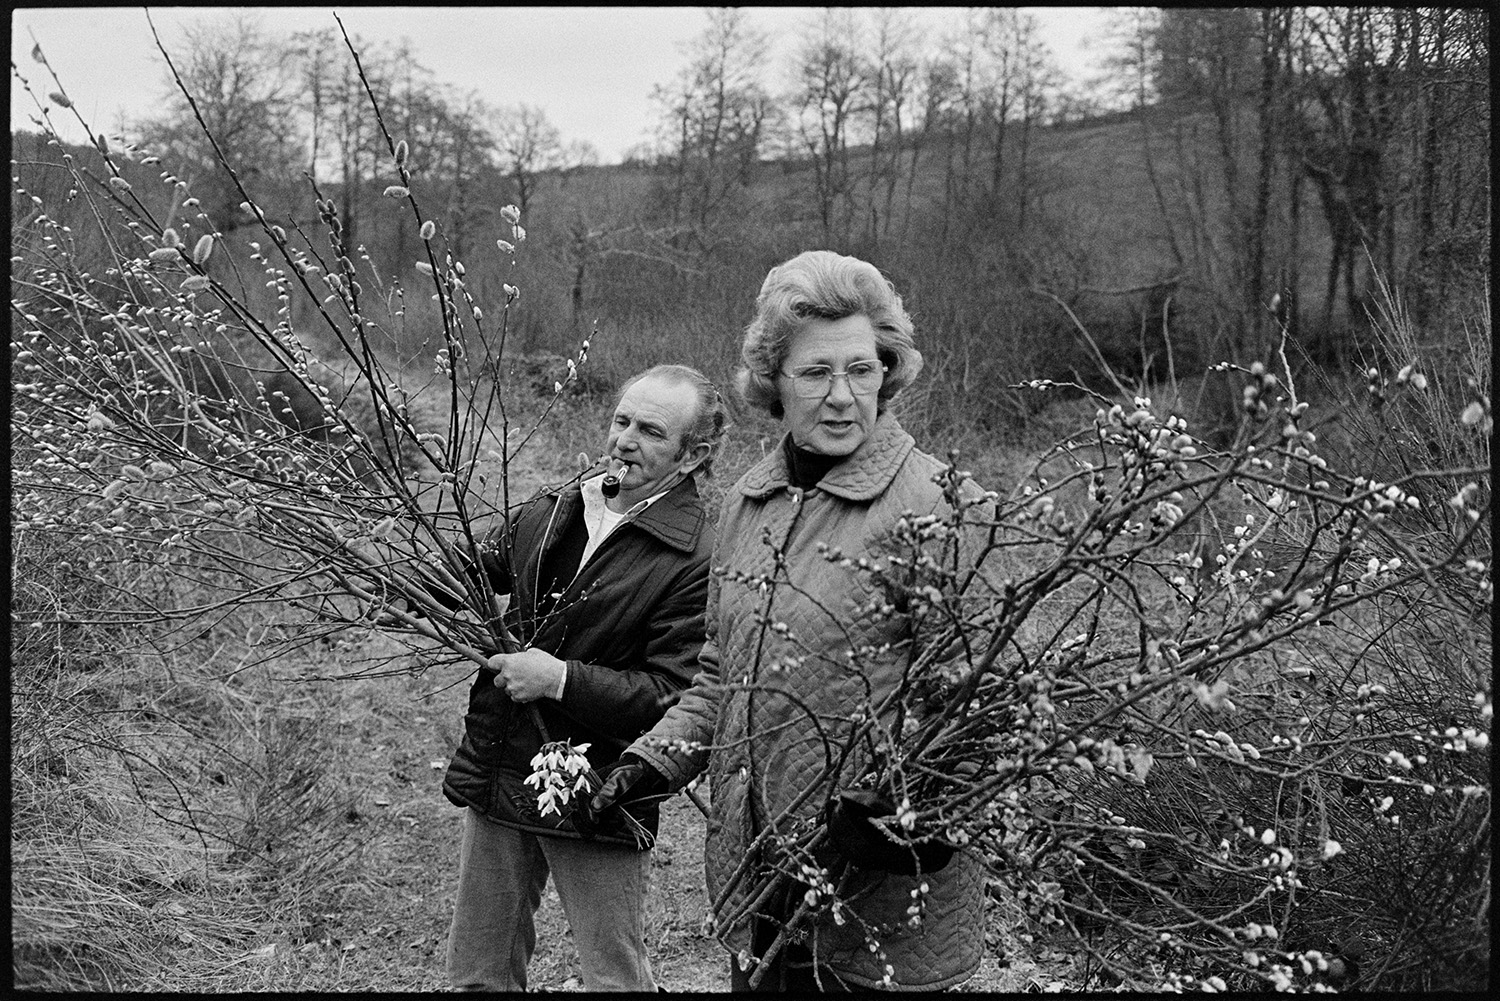 Couple collecting branches and Pussy Willow for Easter decorations in church. 
[Tom Nancekivell and Beatrice Nancekivell collecting branches of pussy willow from hedges at Combehouse, Dolton, for Easter decorations in the Church. Tom Nancekivell is smoking a pipe.]